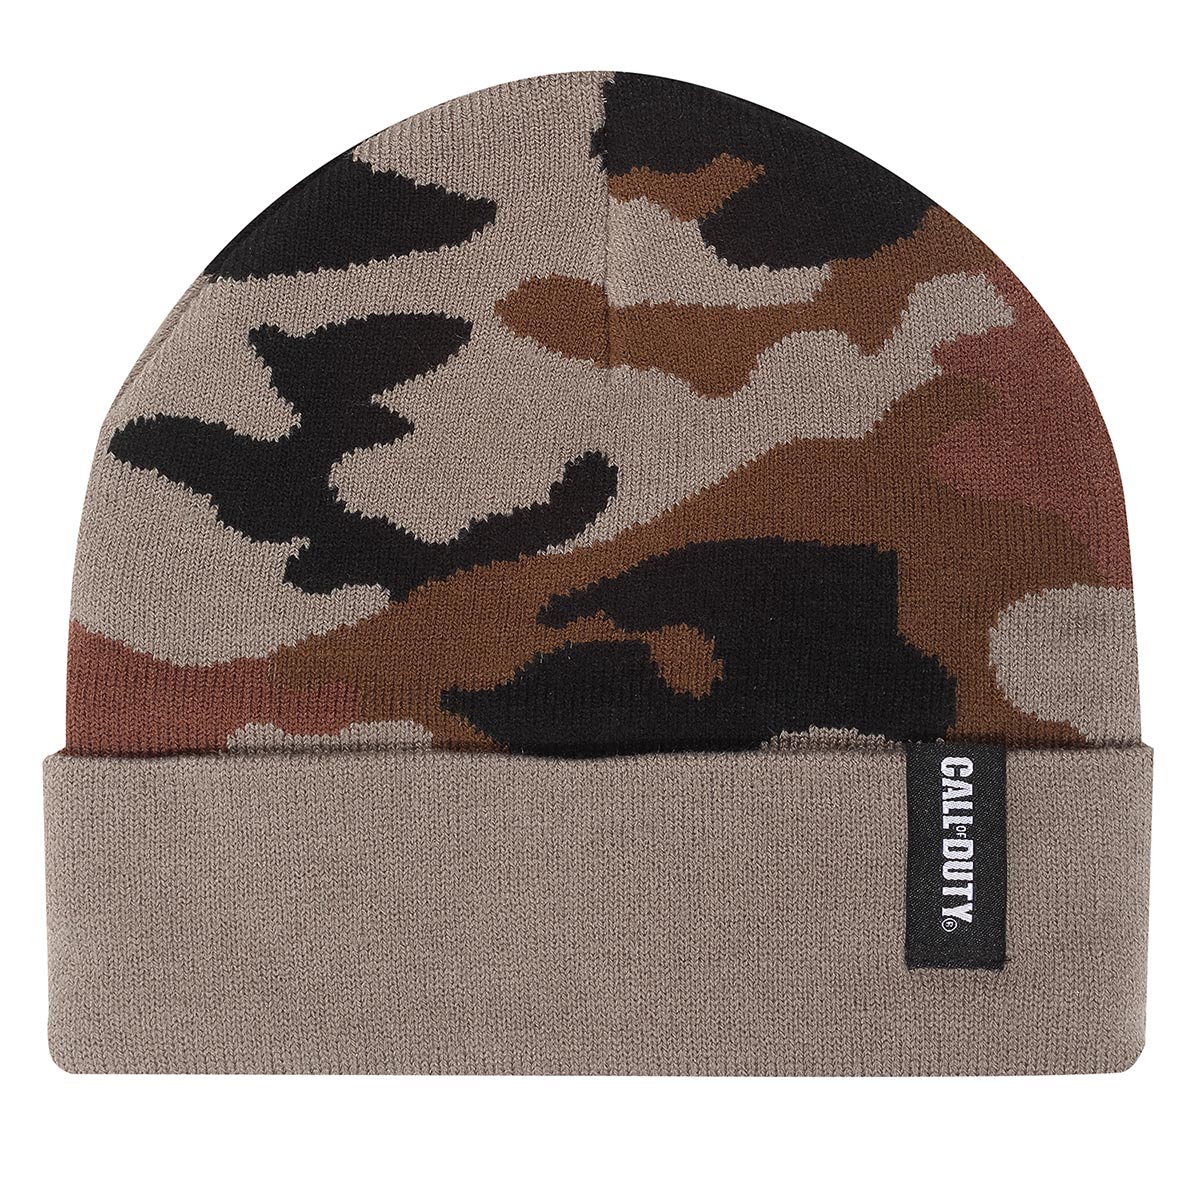 Call Of Duty High Build Embroidery Beanie